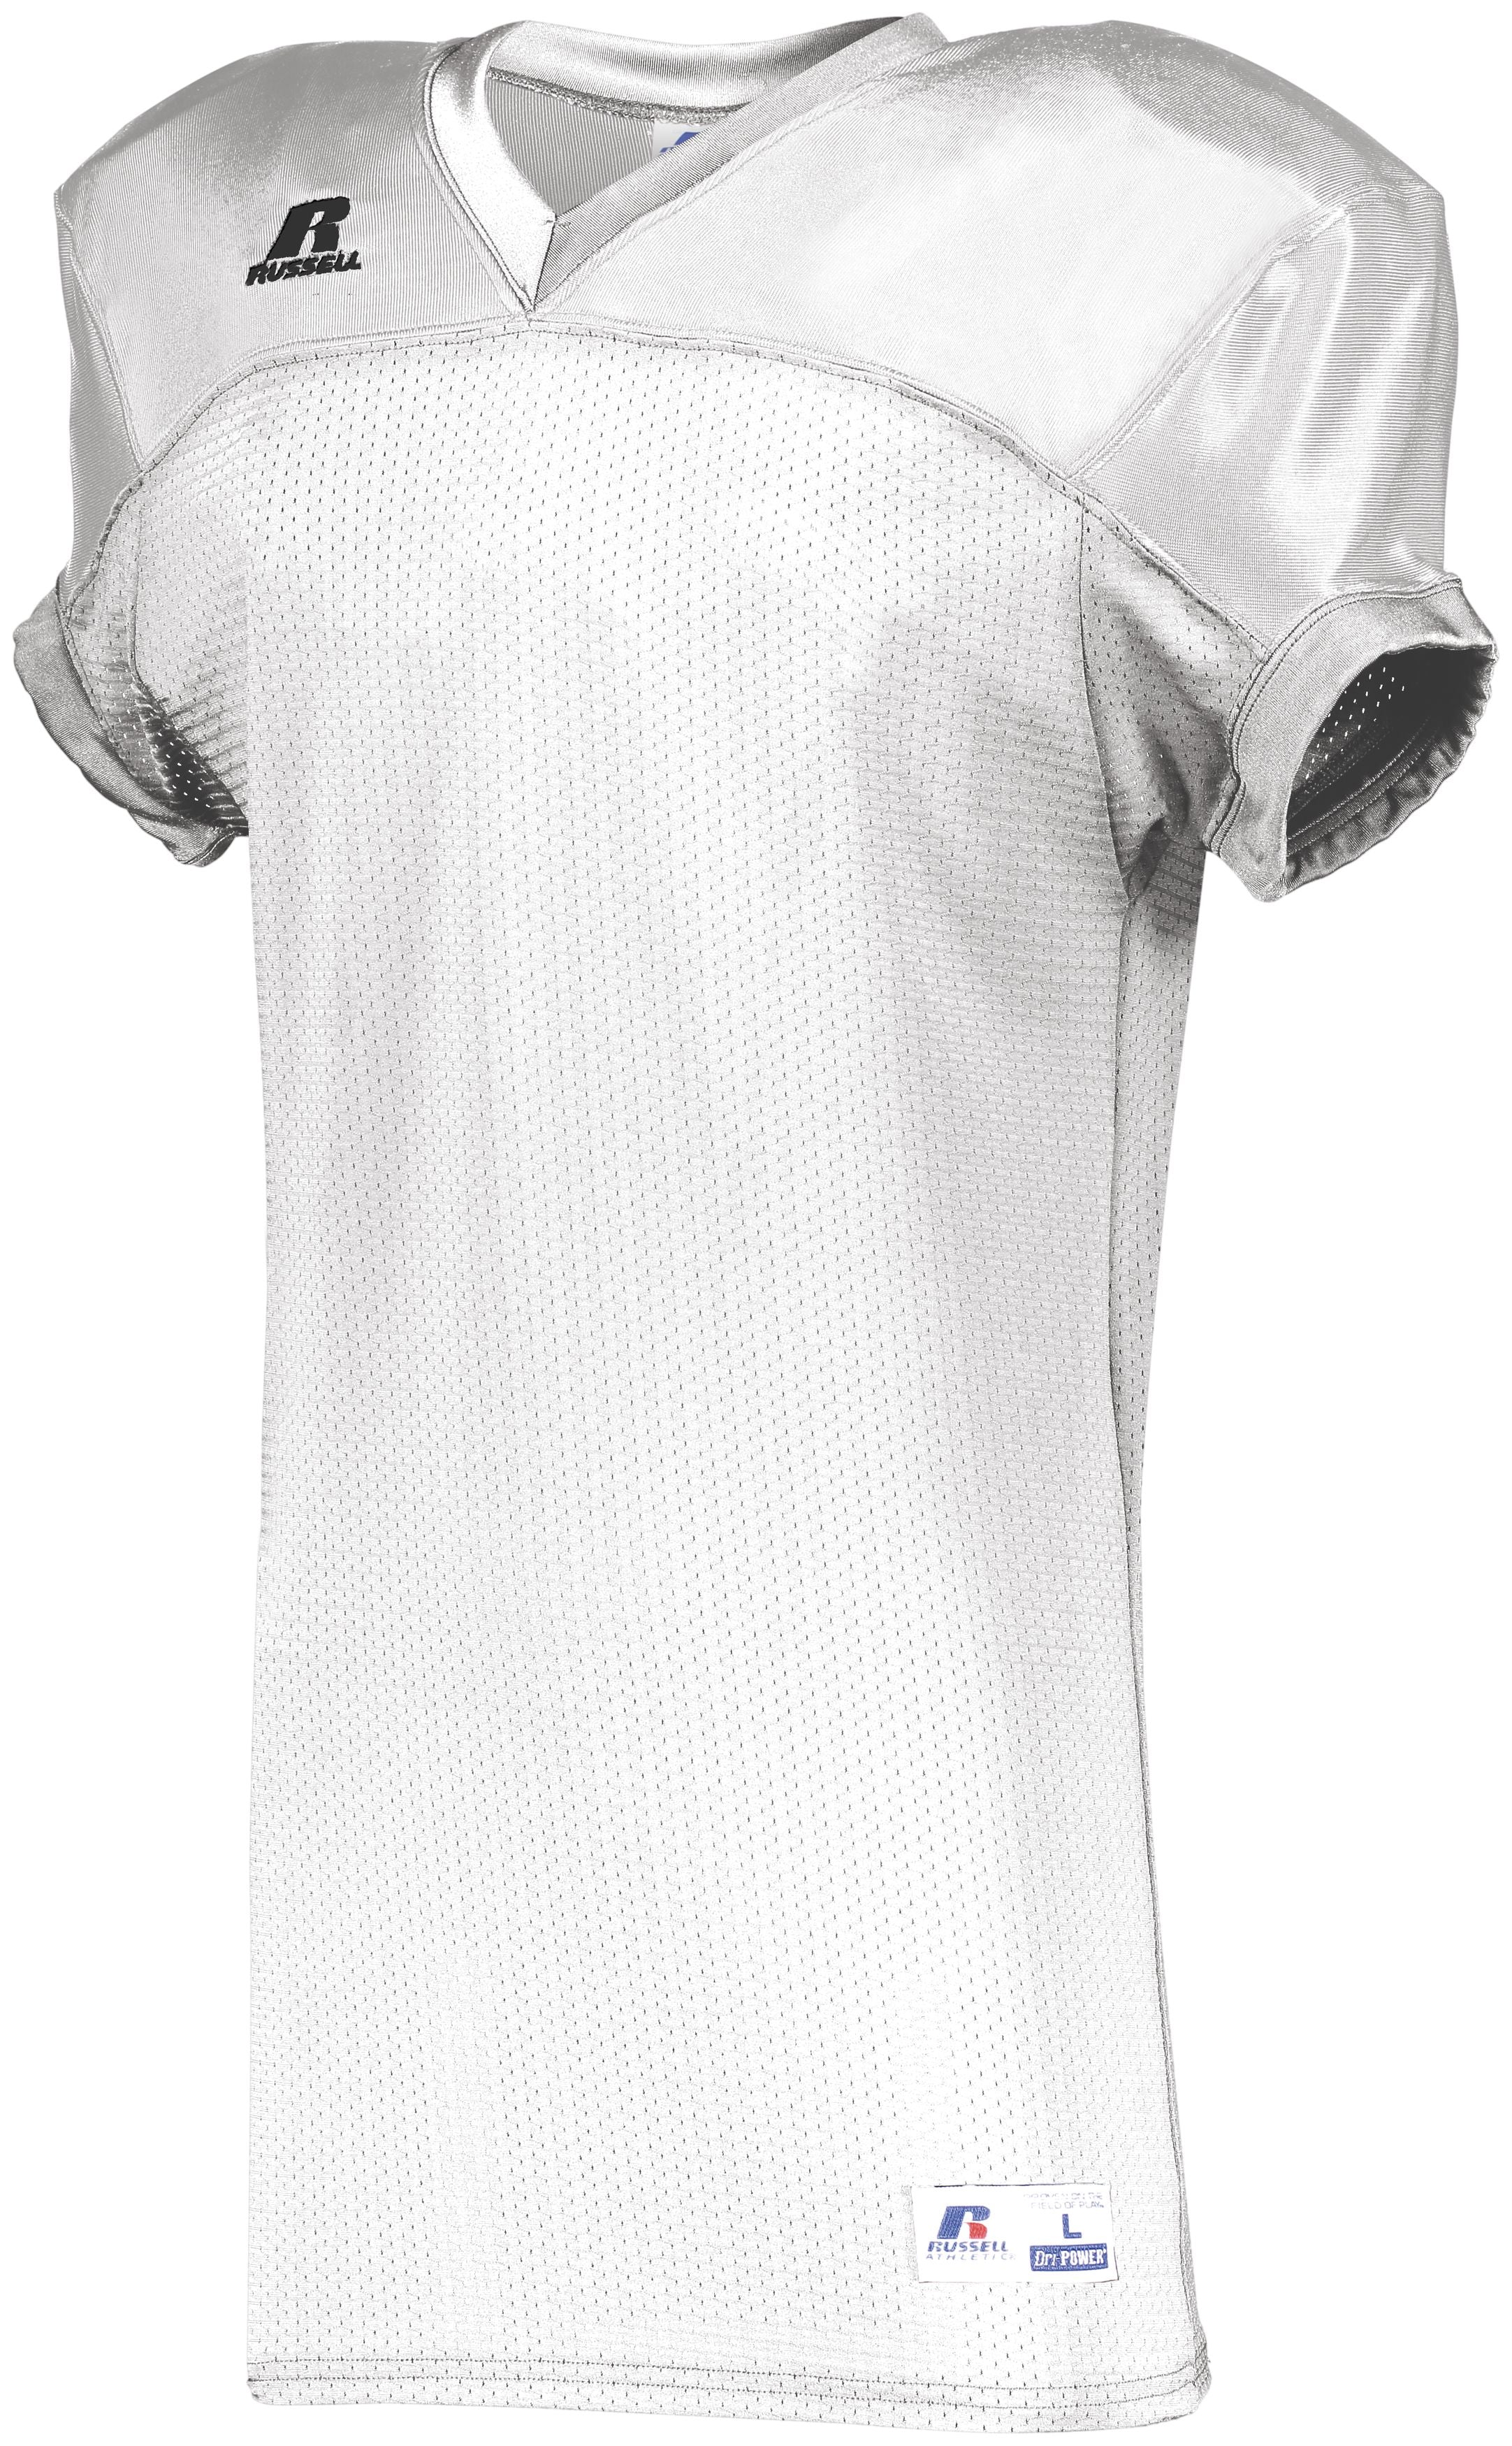 Russell Athletic Stretch Mesh Game Jersey in White  -Part of the Adult, Adult-Jersey, Football, Russell-Athletic-Products, Shirts, All-Sports, All-Sports-1 product lines at KanaleyCreations.com